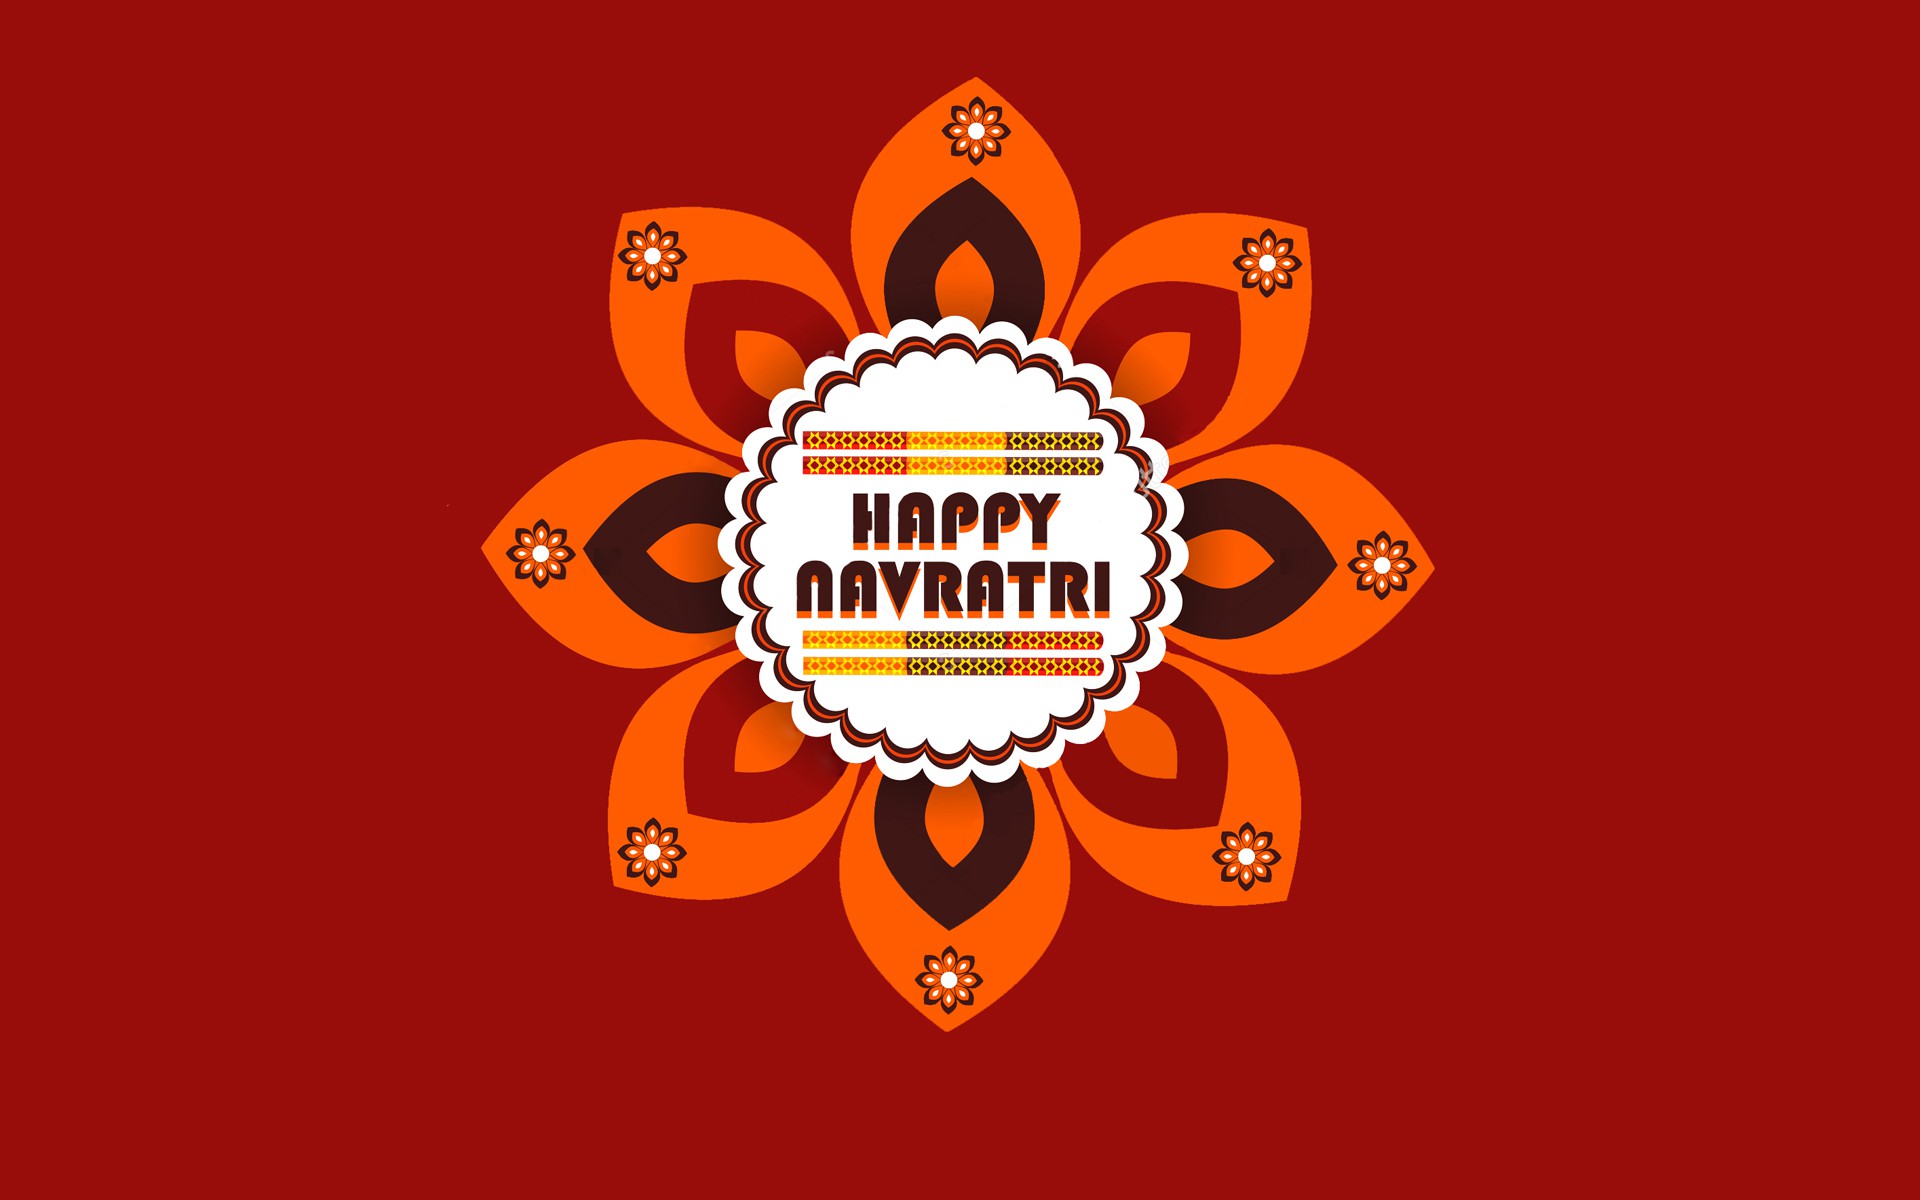 Floral Navratri Wishes Free Awesome Image For Mobile